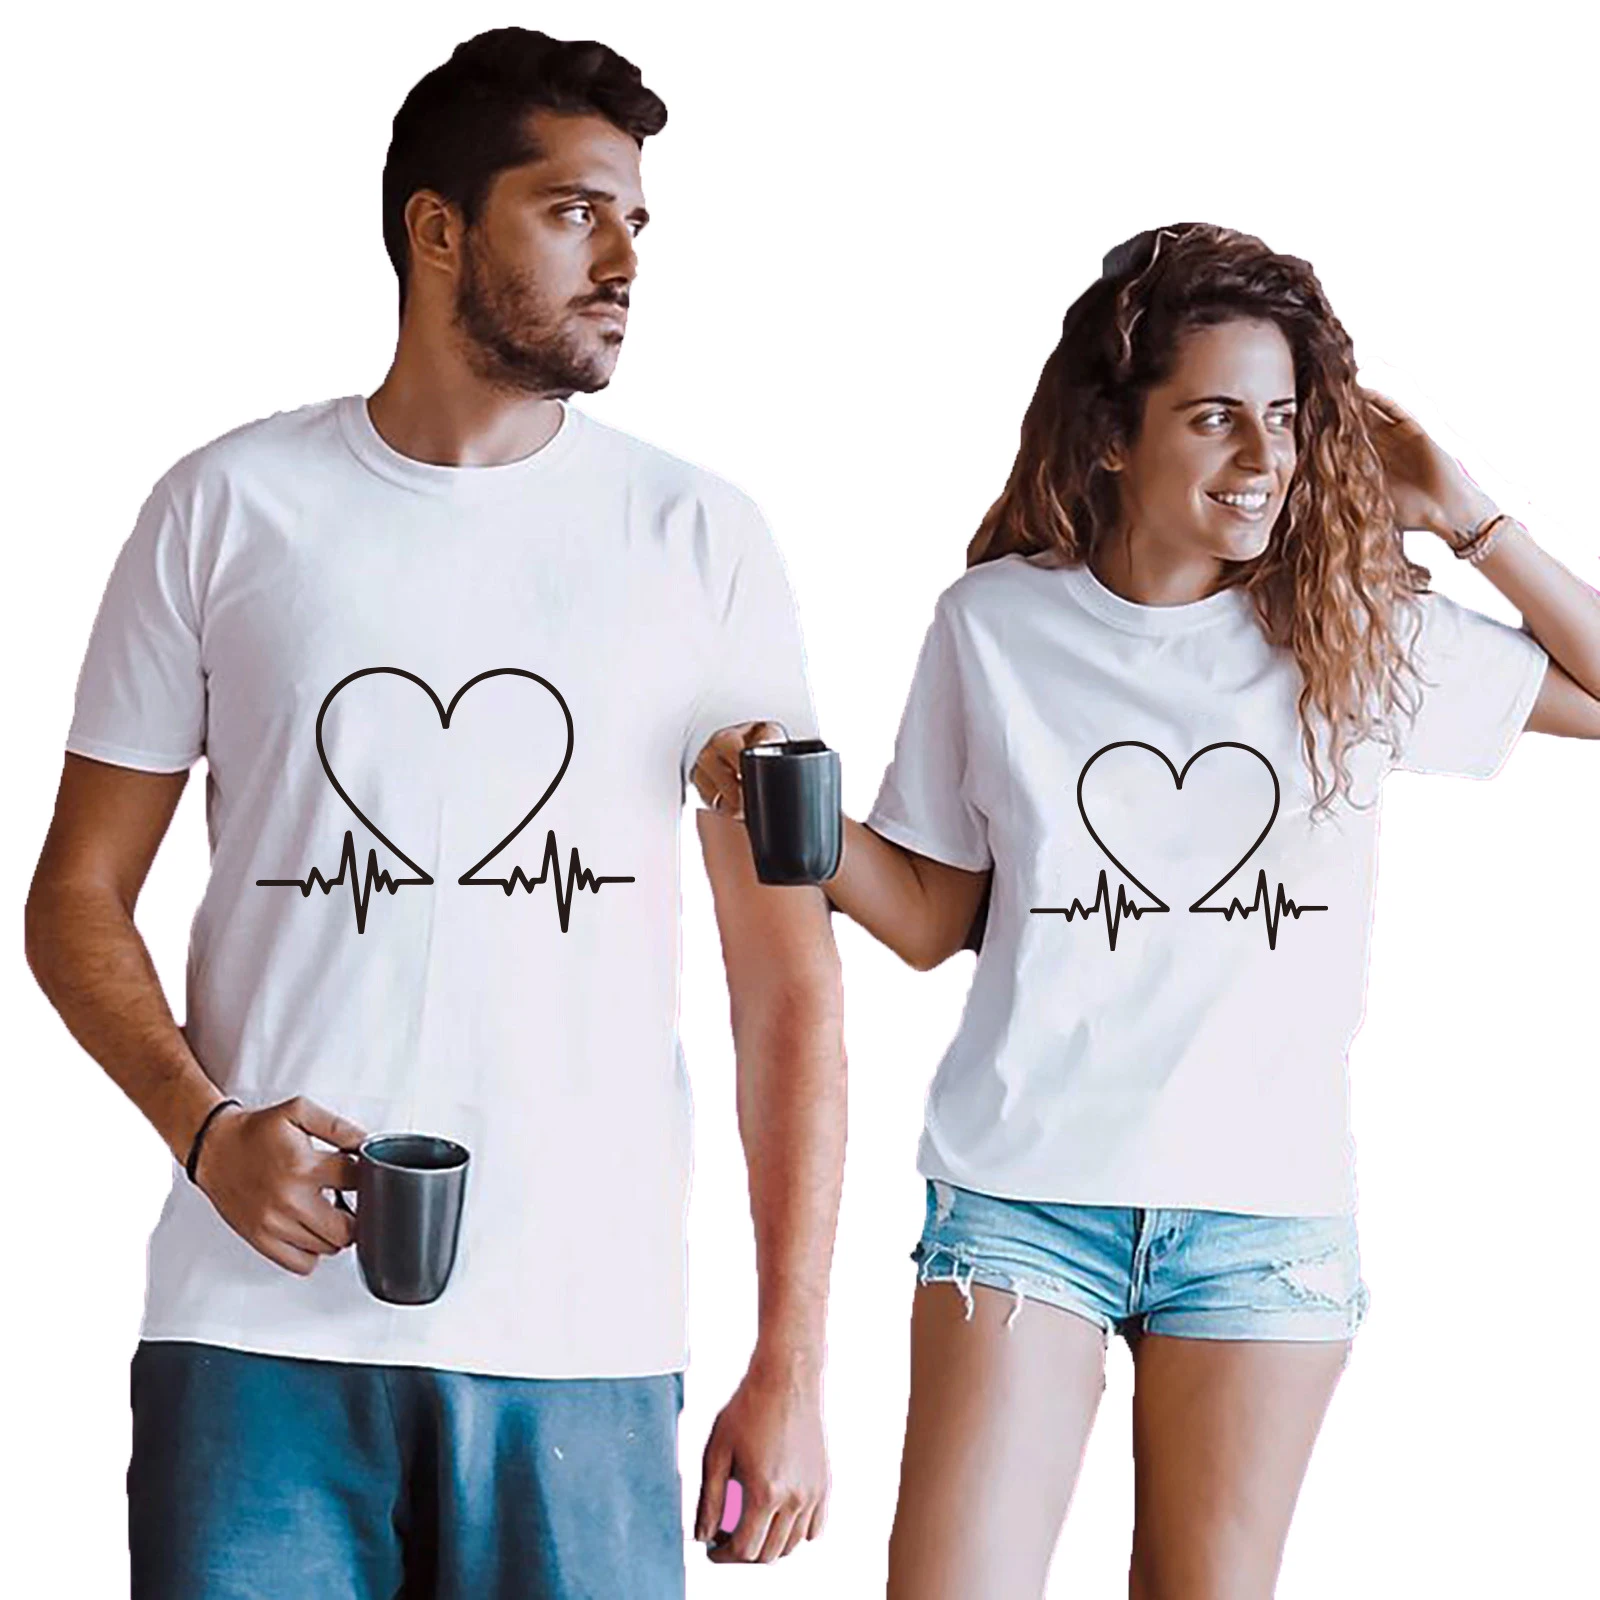 grænse råd bælte Wholesale Love Heartbeat Print Matching T-Shirt for Couple Lover Romantic  Lovely Casual Tops Tees Custom Fashion Valentine Shirt From m.alibaba.com